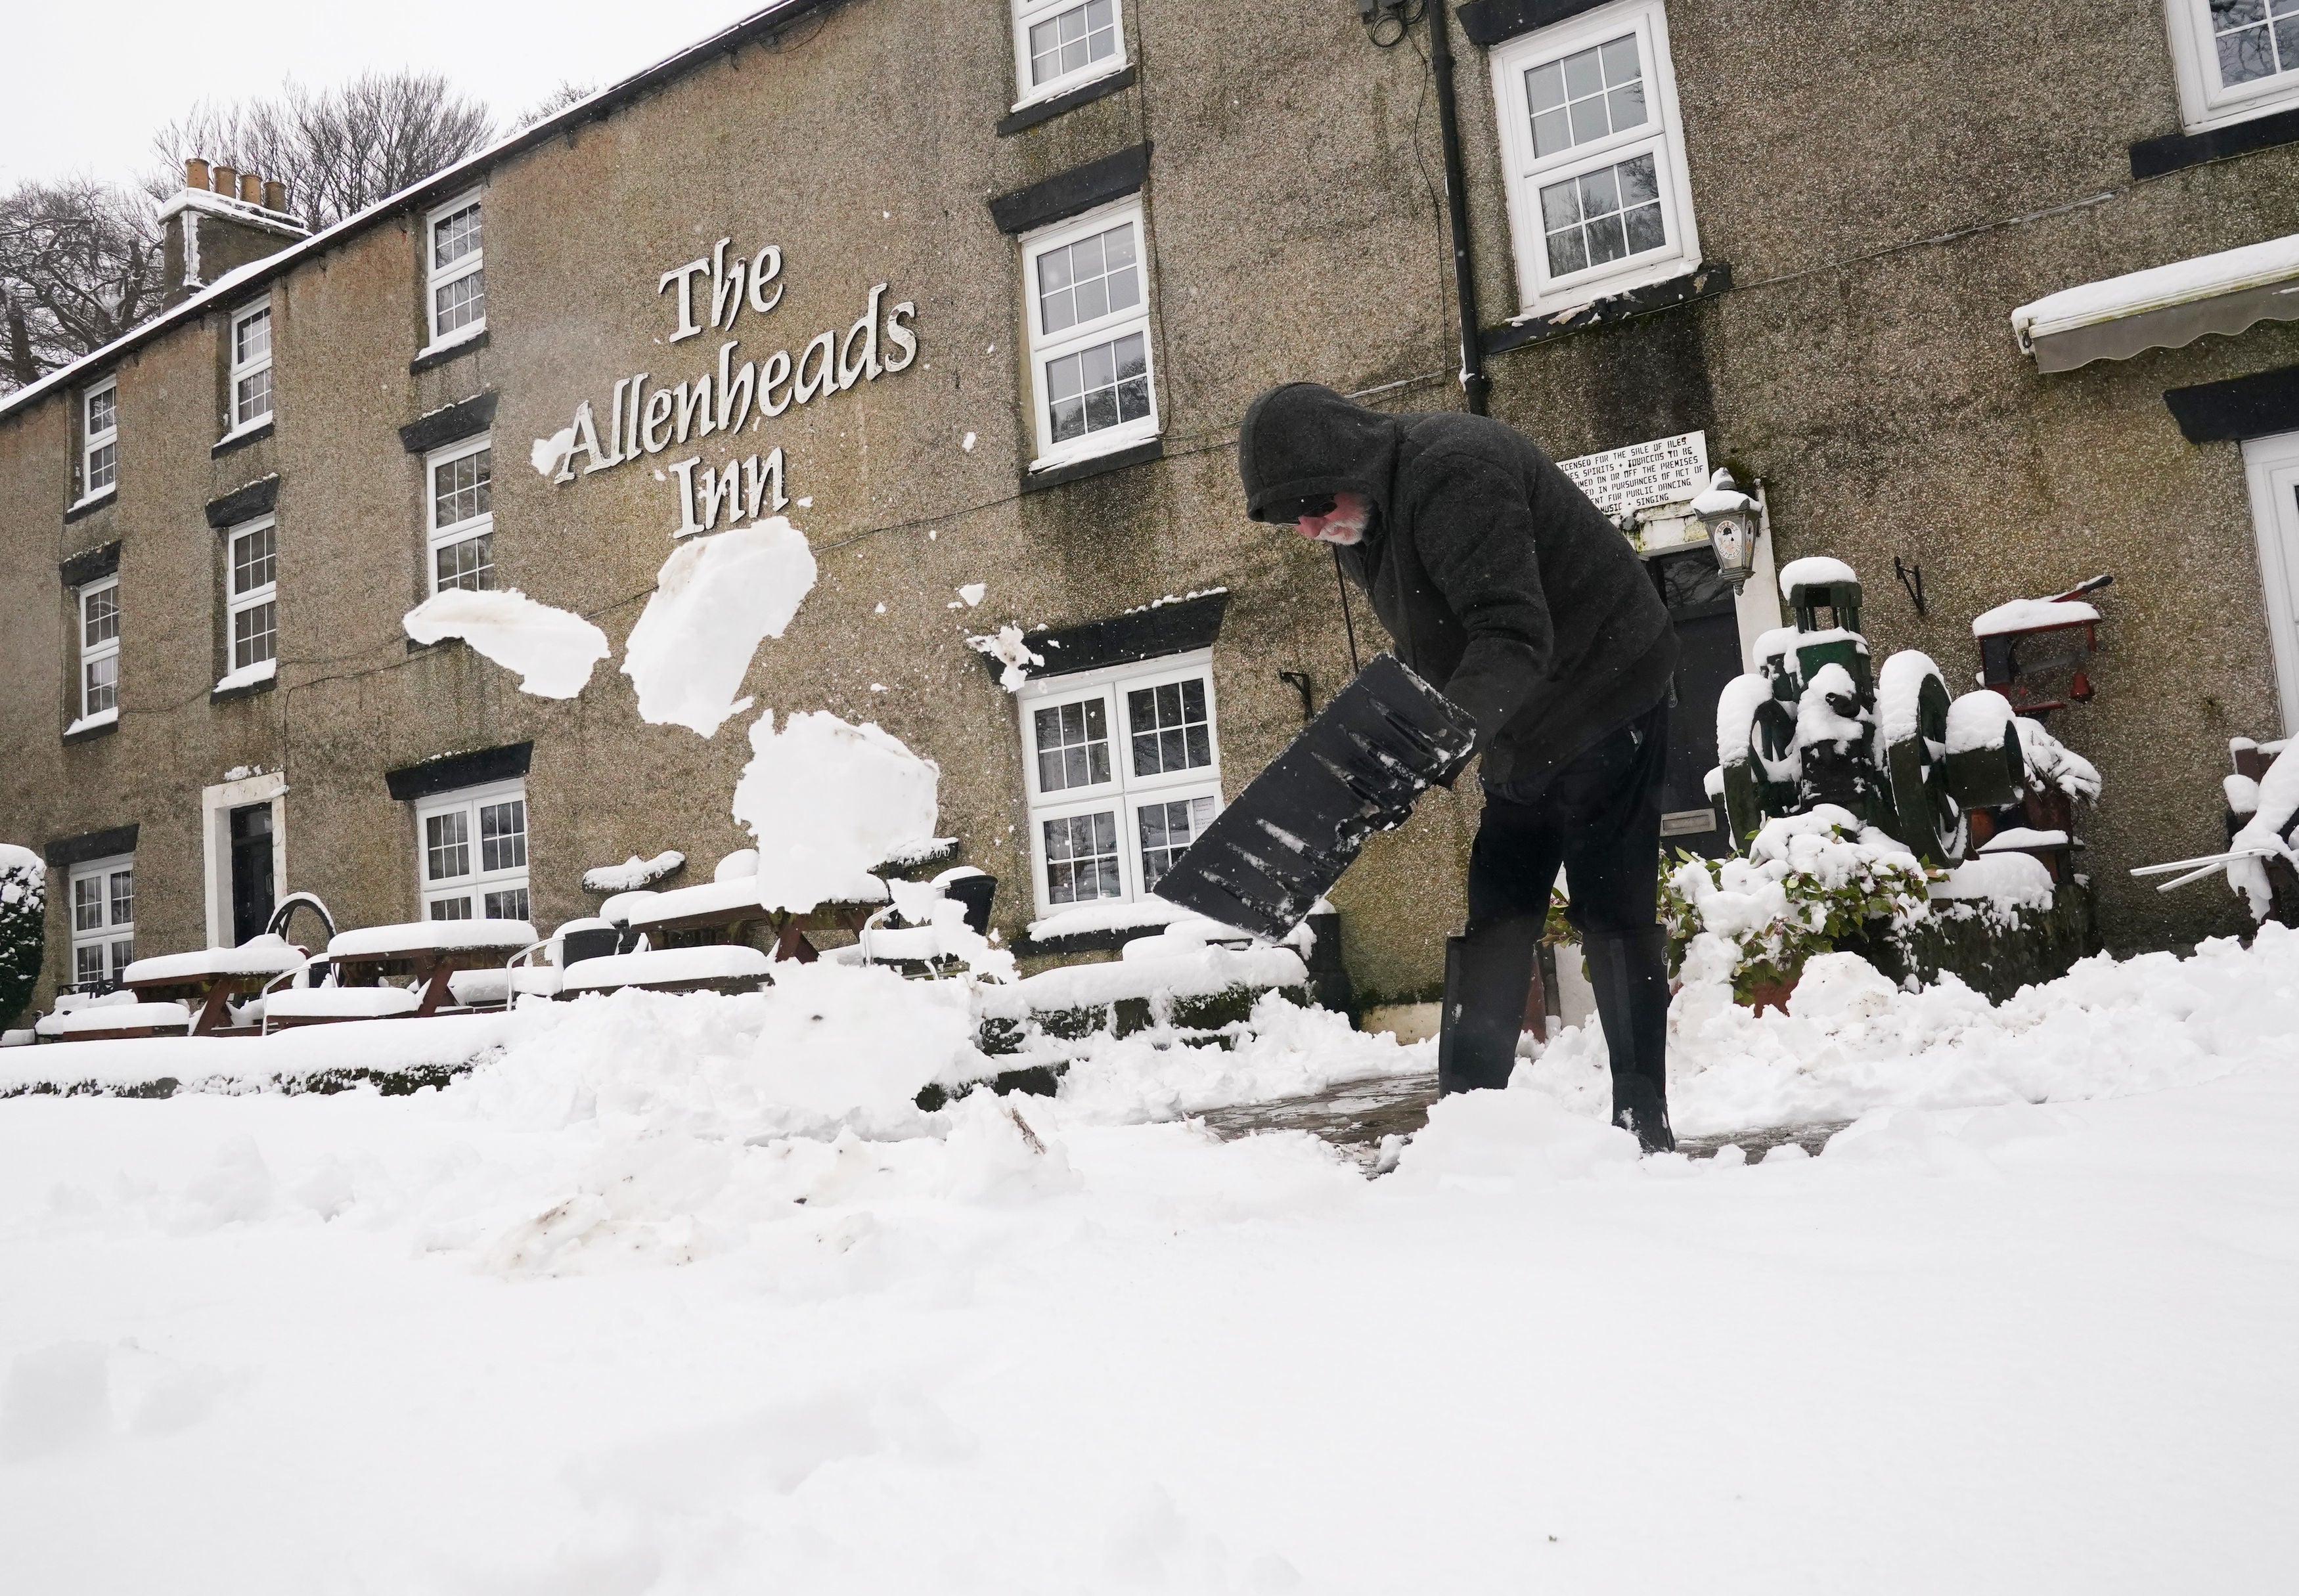 A person clears snow outside The Allenheads Inn in Allenheads, Northumberland